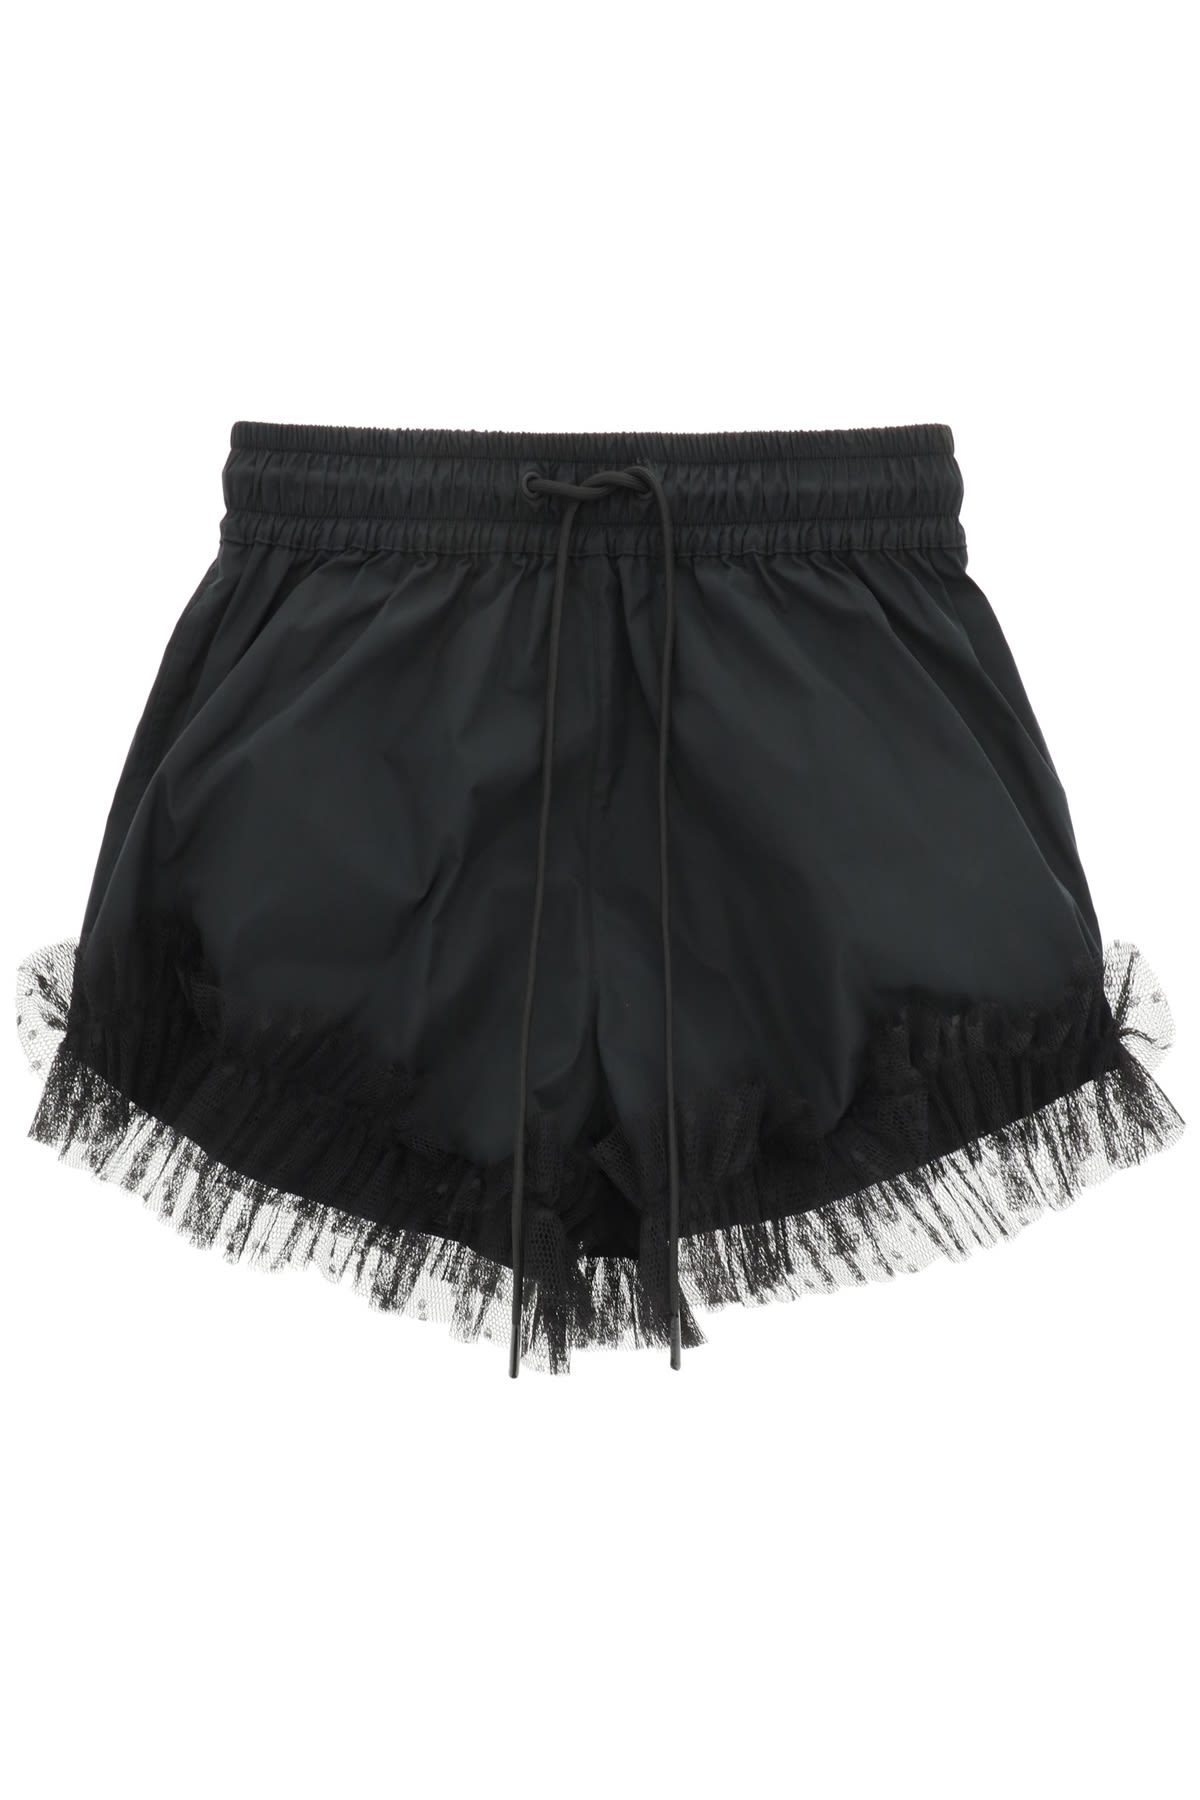 RED Valentino The Black Tag Shorts